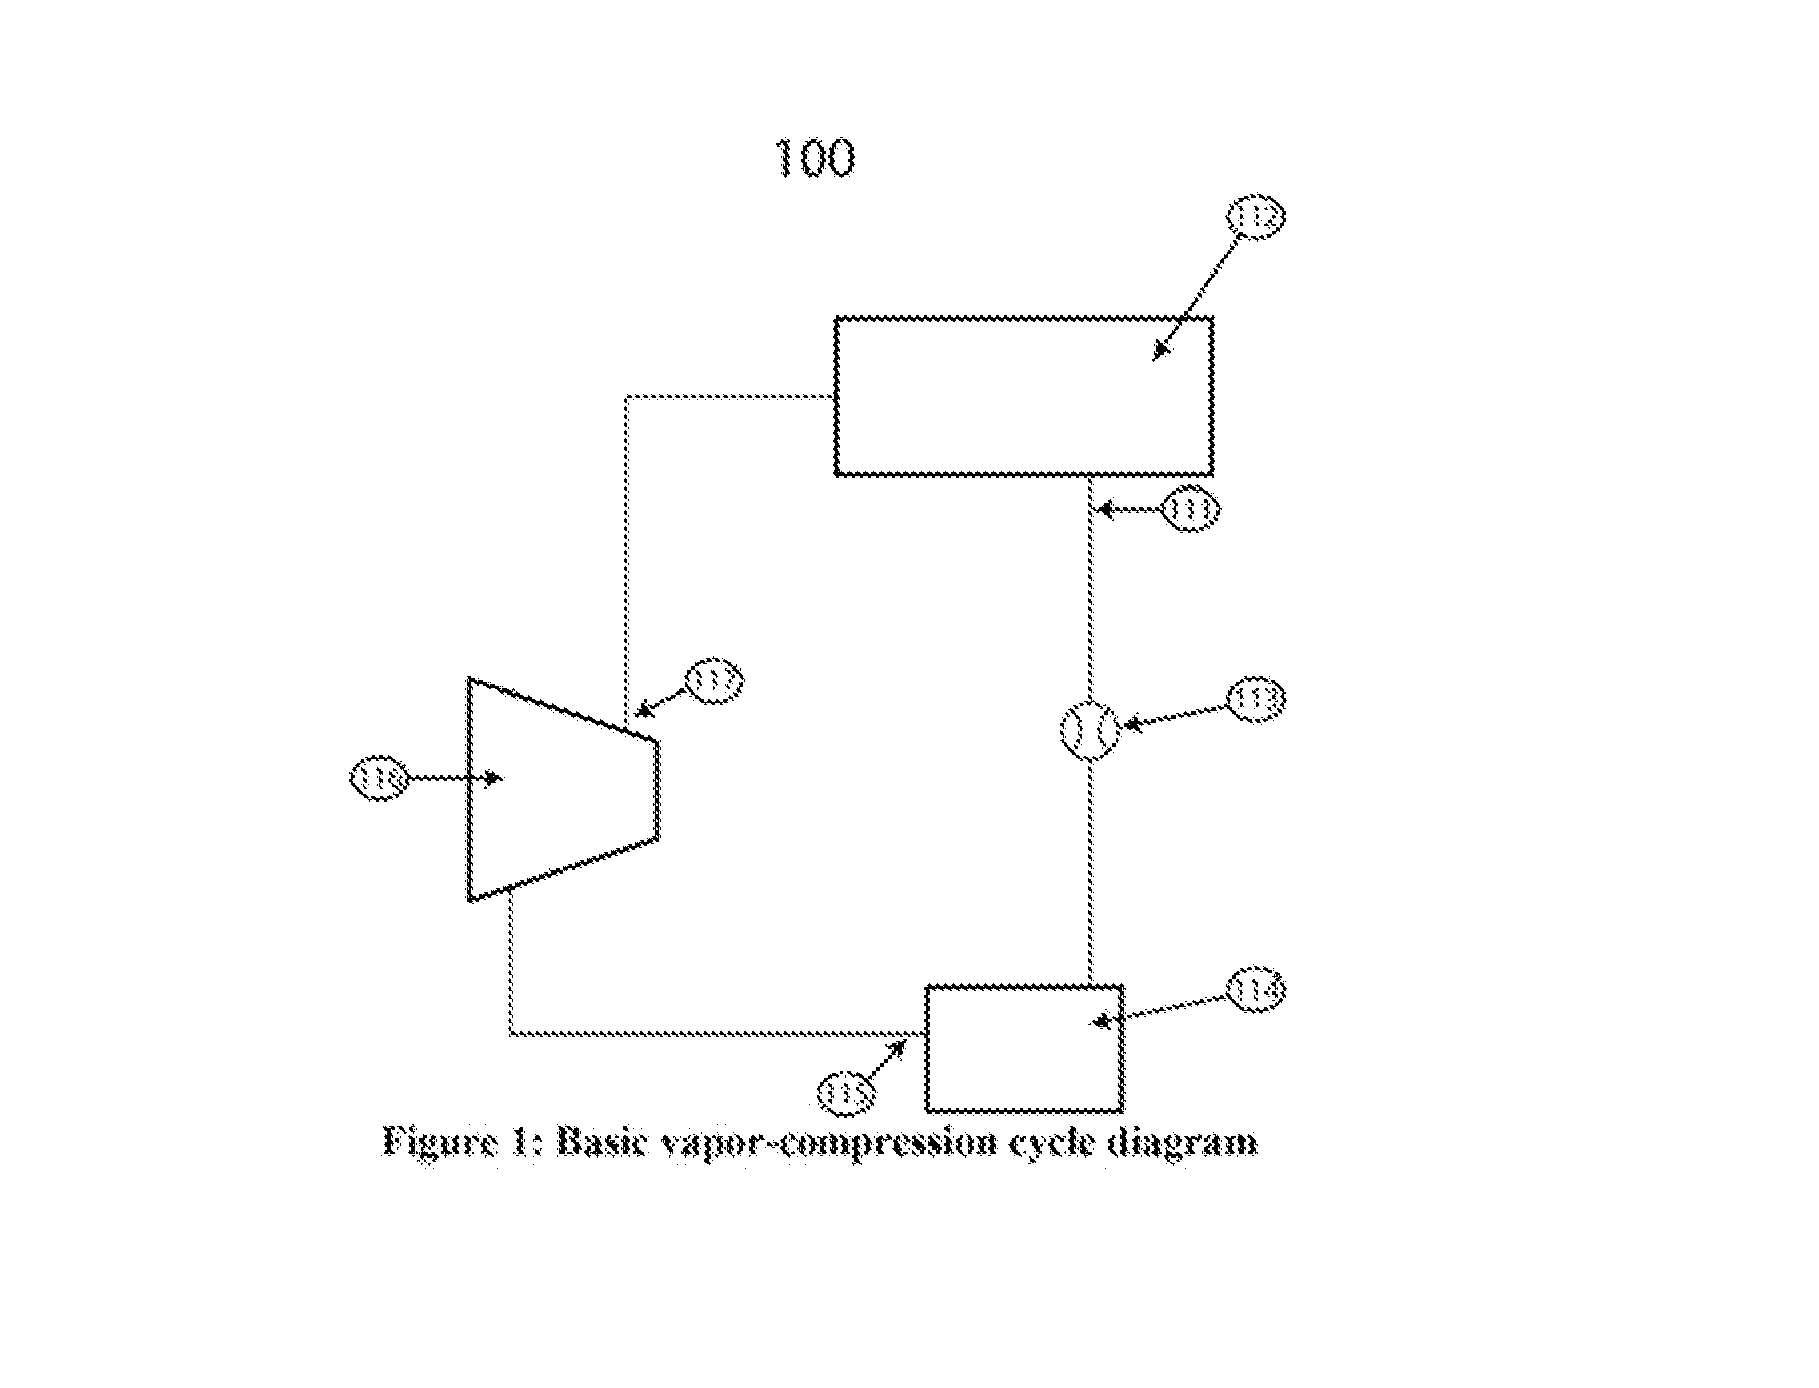 Cost-effective remote monitoring, diagnostic and system health prediction system and method for vapor compression and heat pump units based on compressor discharge line temperature sampling